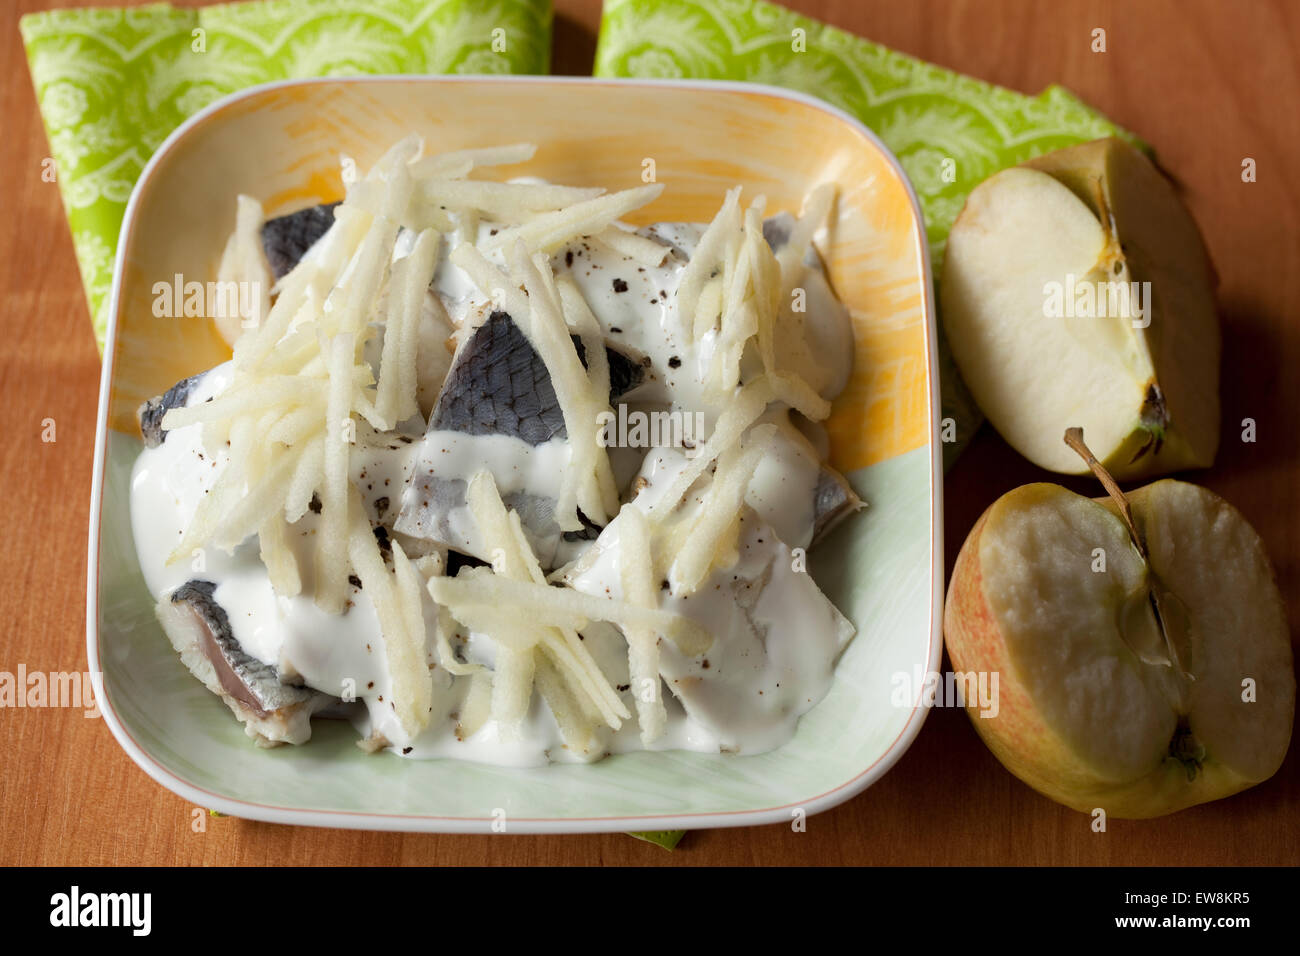 fish filet with apple in cream sauce Stock Photo